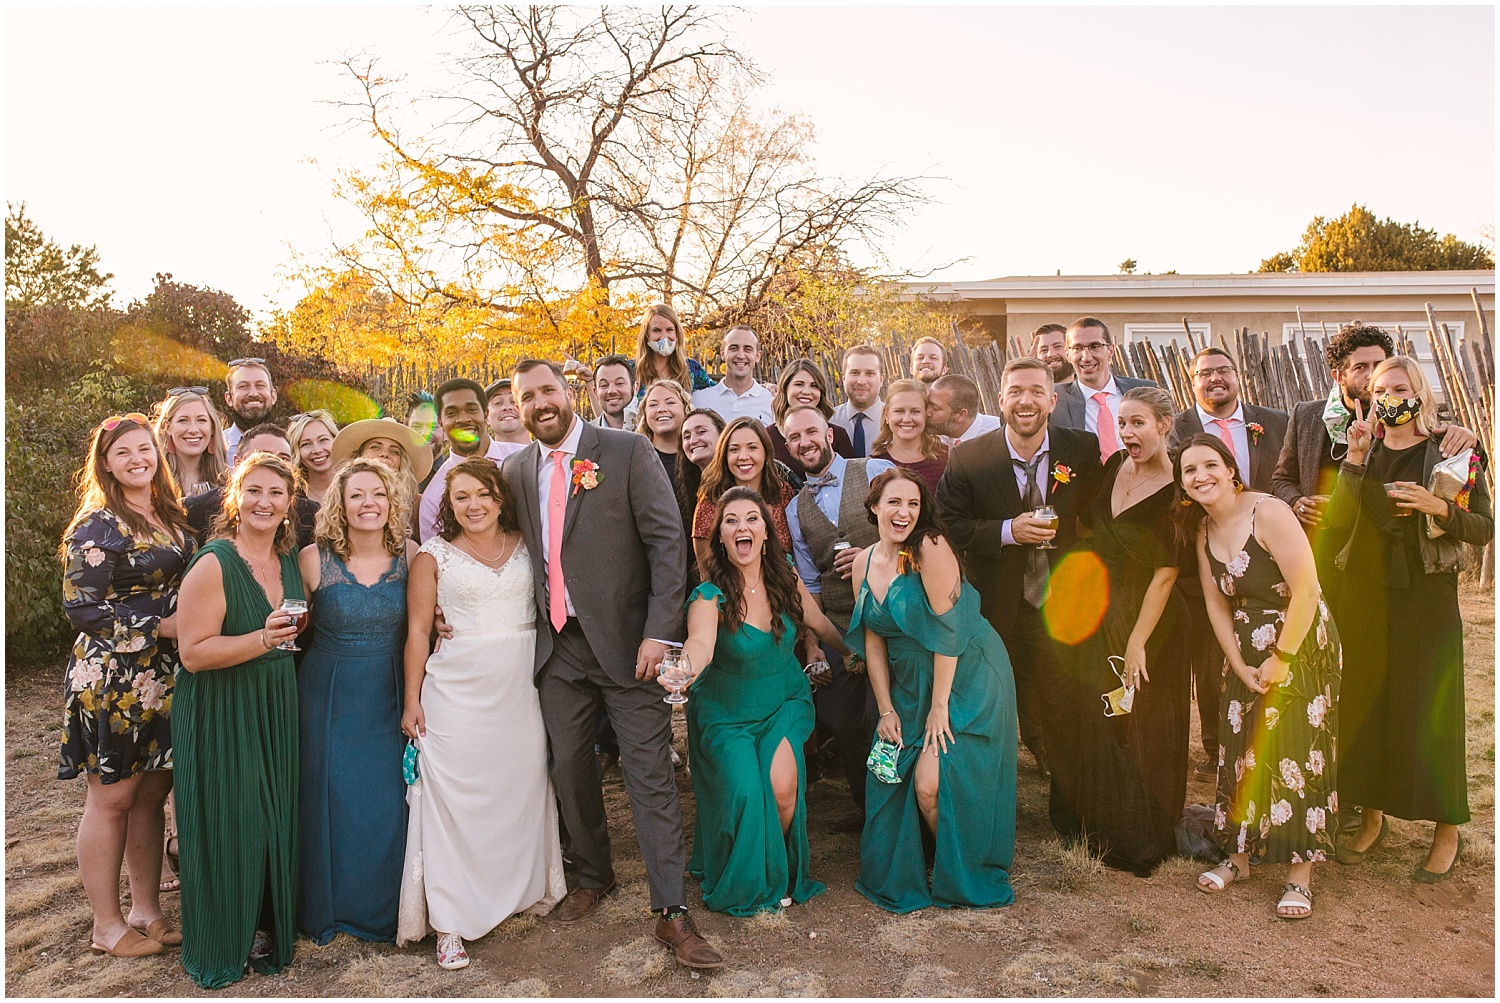 Bride and groom with all their friends at sunset backyard wedding reception